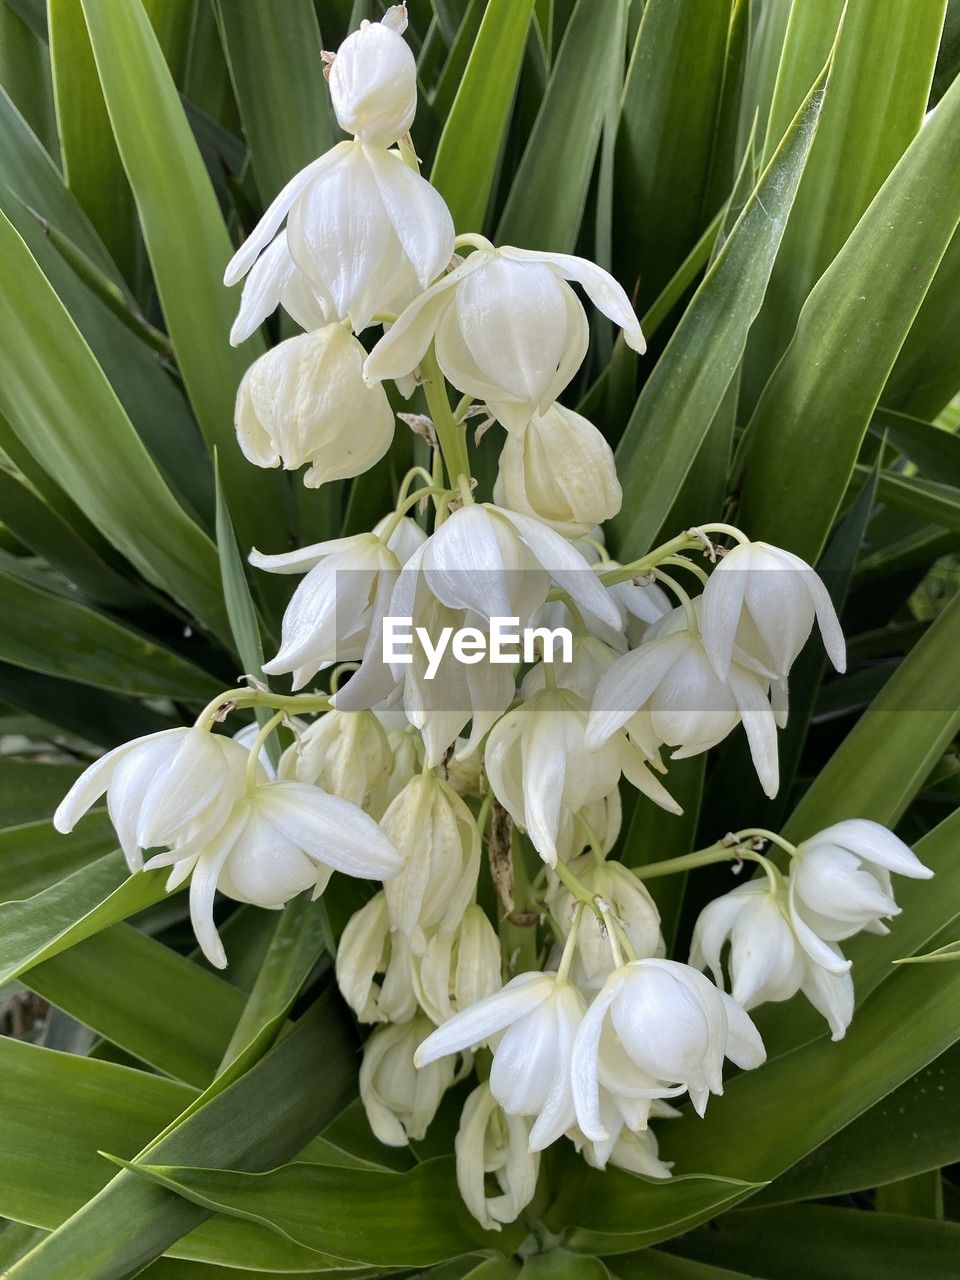 plant, flower, beauty in nature, flowering plant, leaf, plant part, freshness, growth, petal, close-up, nature, green, white, fragility, no people, flower head, inflorescence, botany, springtime, outdoors, lily